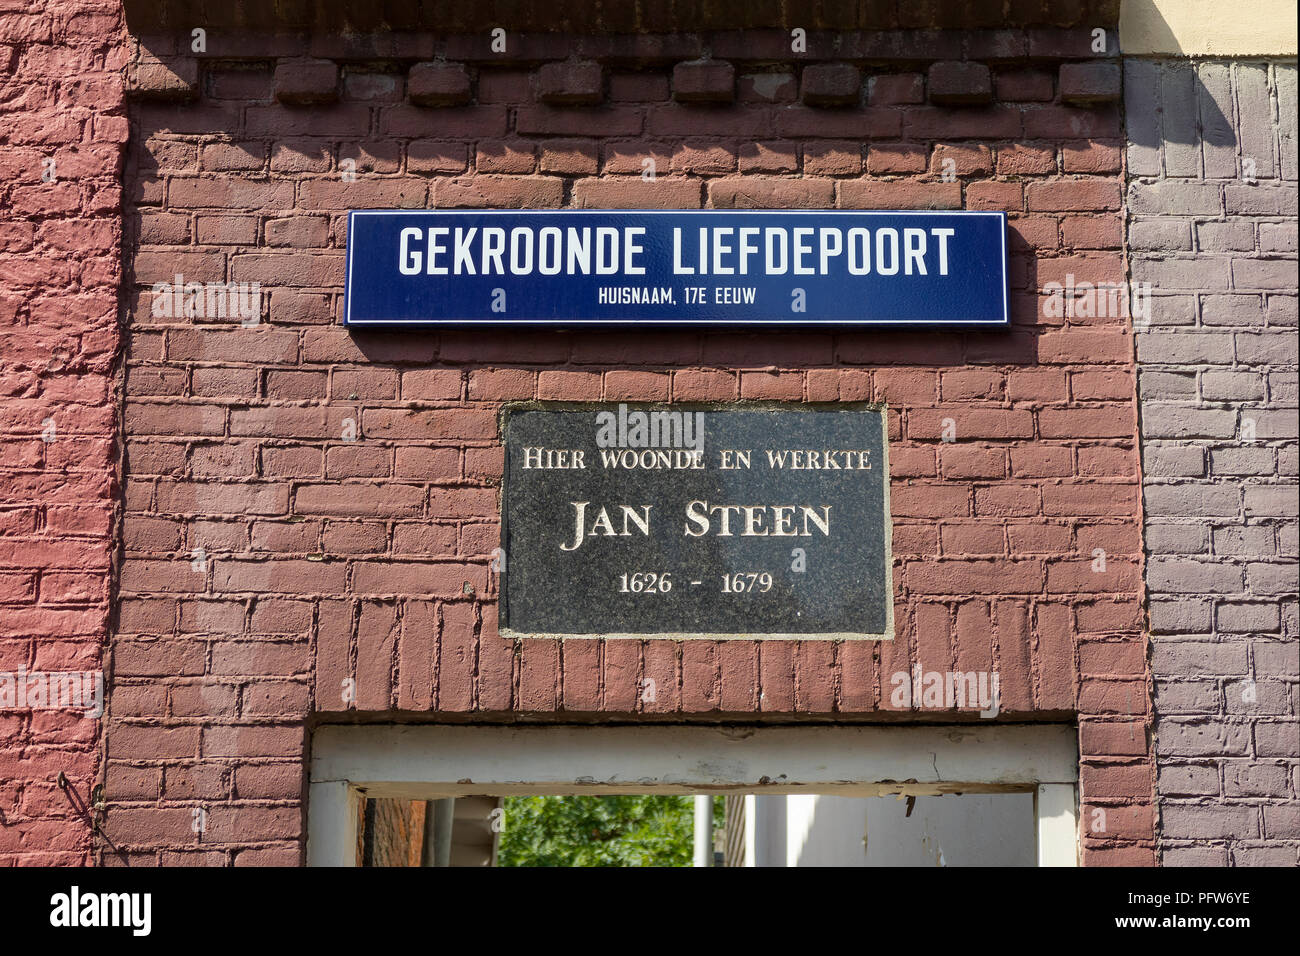 Leiden, Netherlands - July 17, 2018: Built in stone saying this is the living and working place of the 17th century painter Jan Steen with  a street s Stock Photo